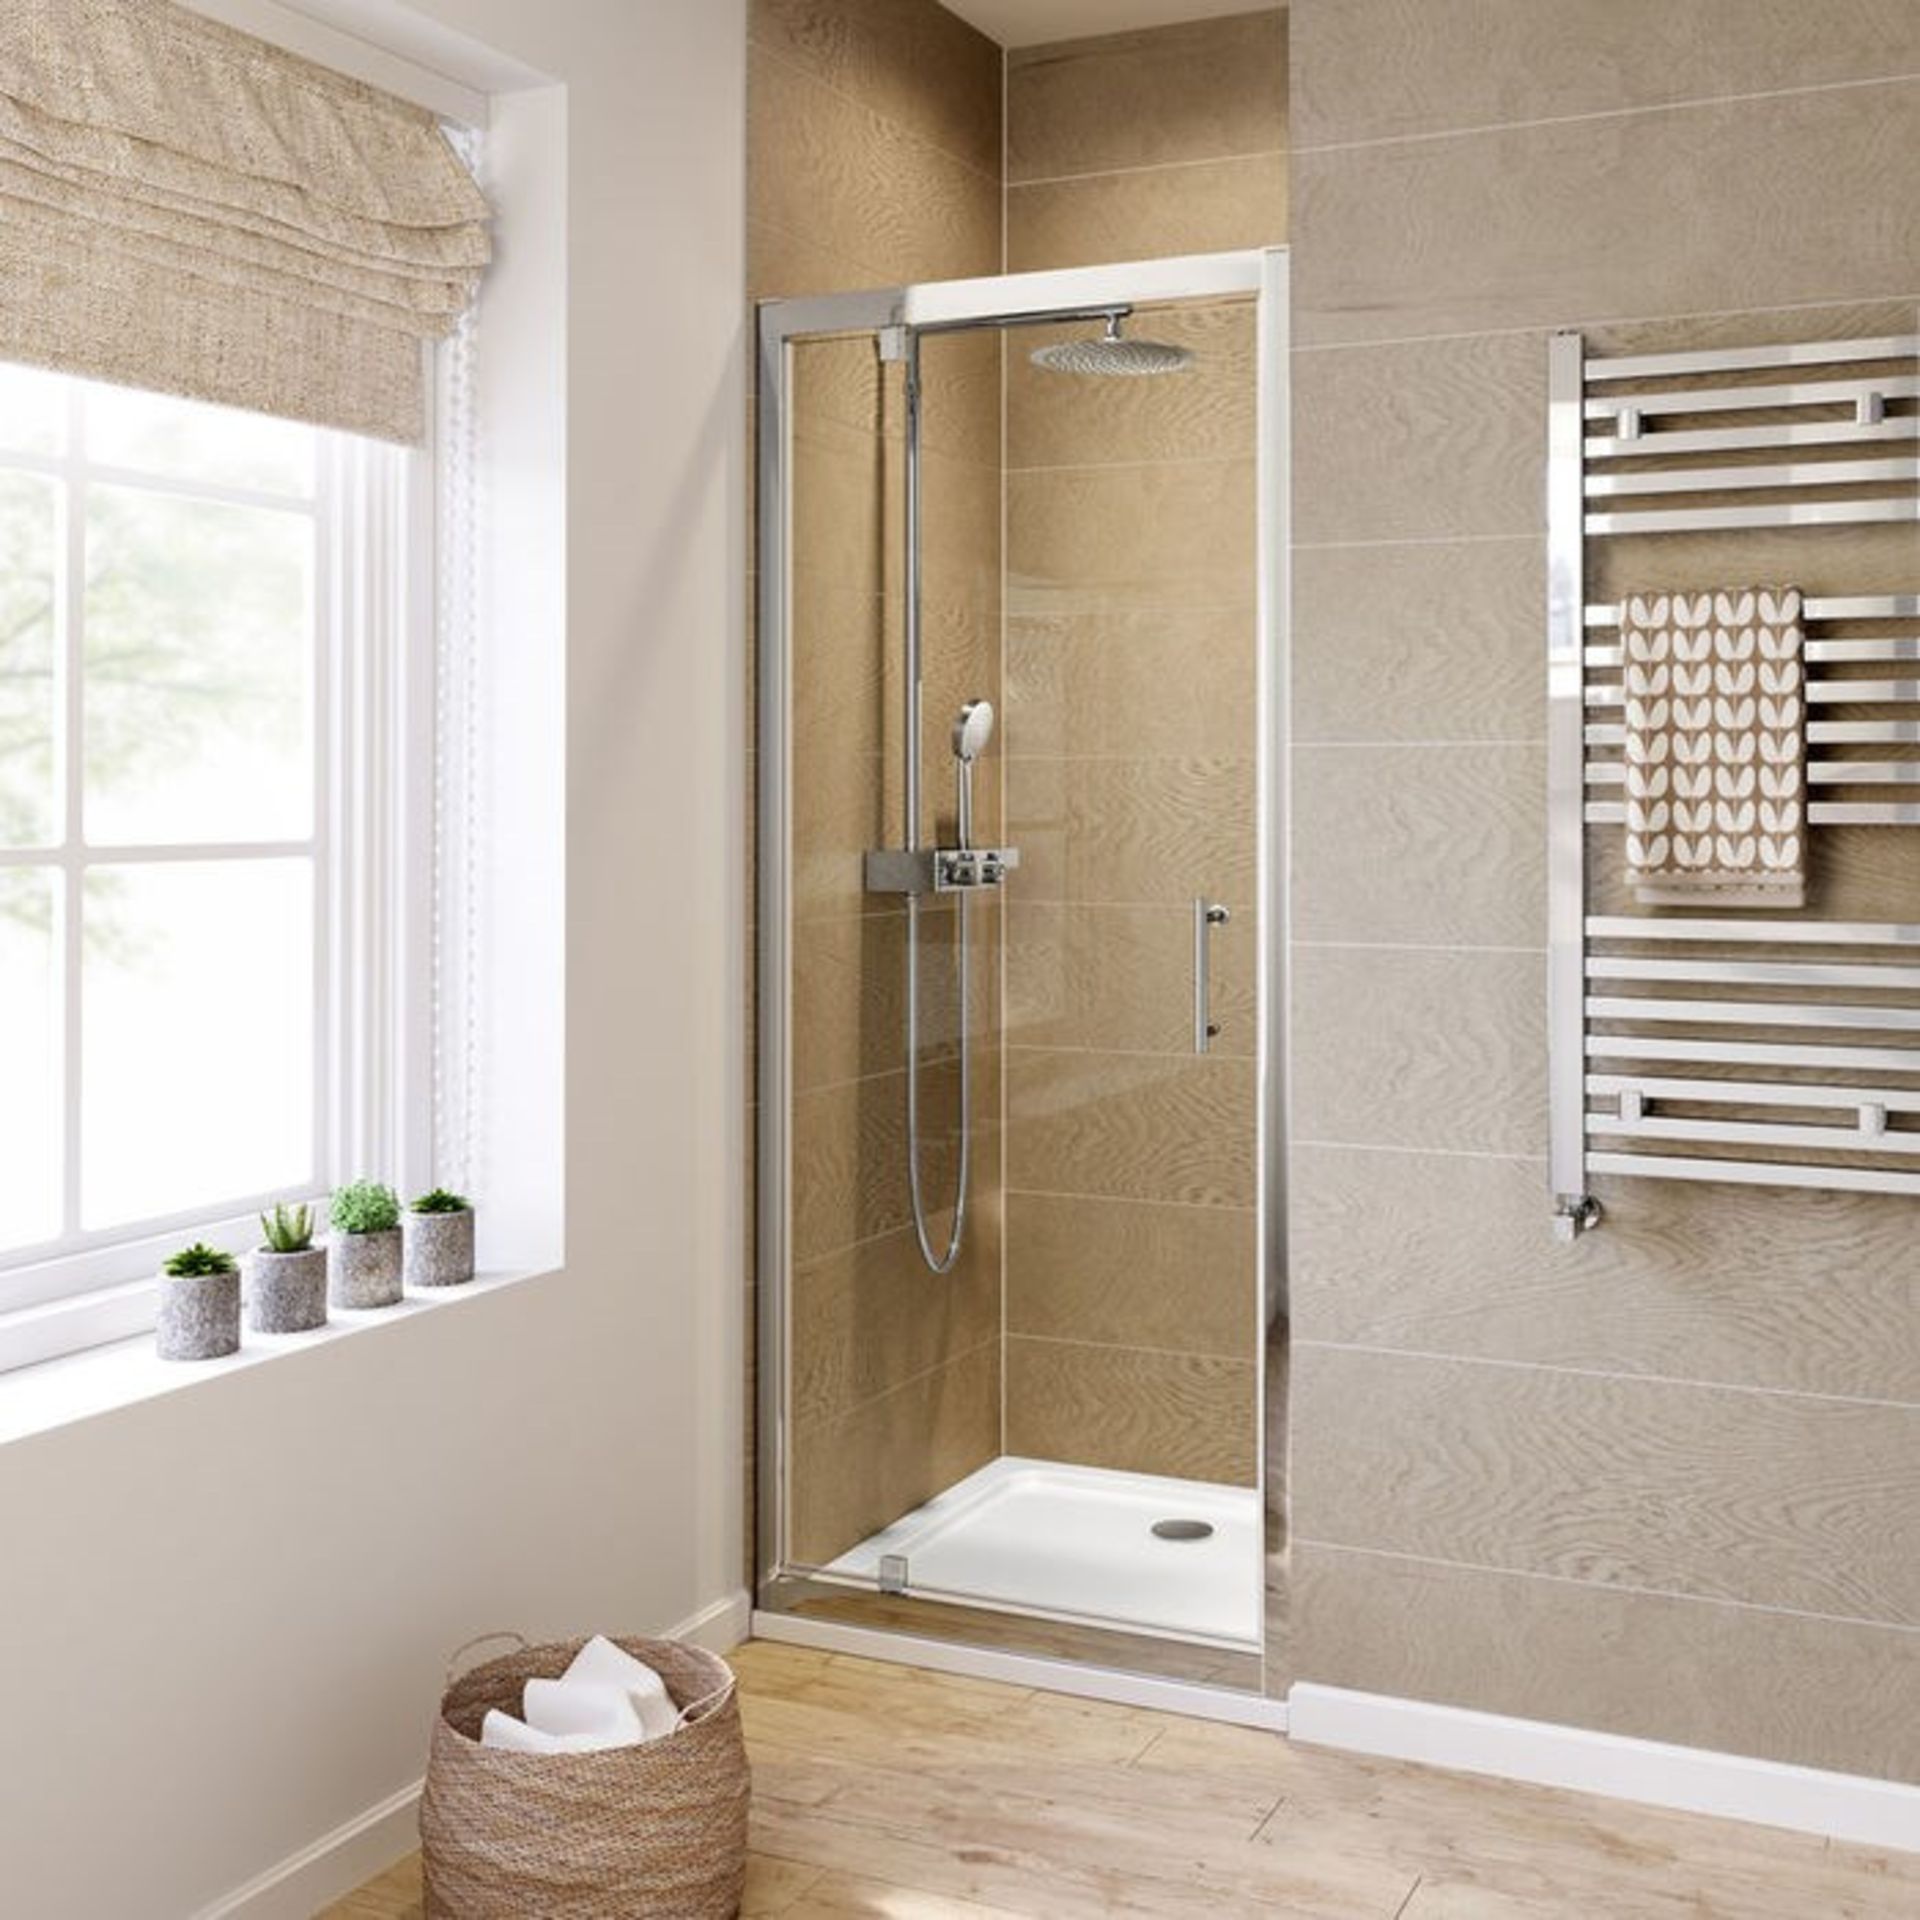 Twyfords 700mm - 6mm - Premium Pivot Shower Door. RRP £299.99.8mm Safety Glass Fully waterproo... - Image 3 of 3